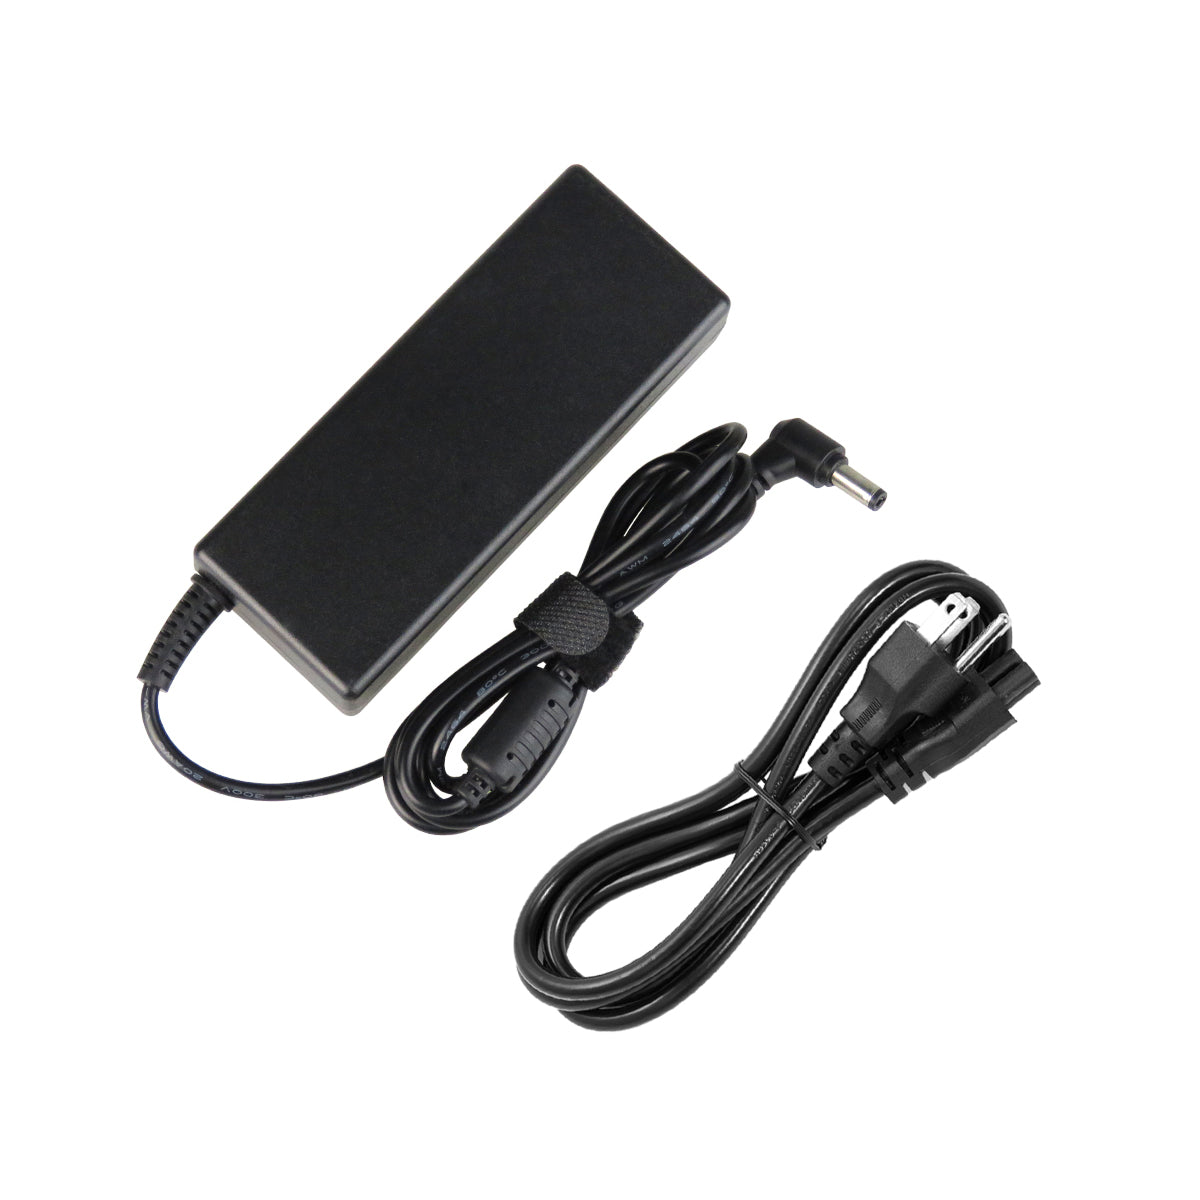 AC Adapter Charger for ASUS X81Sr Notebook.